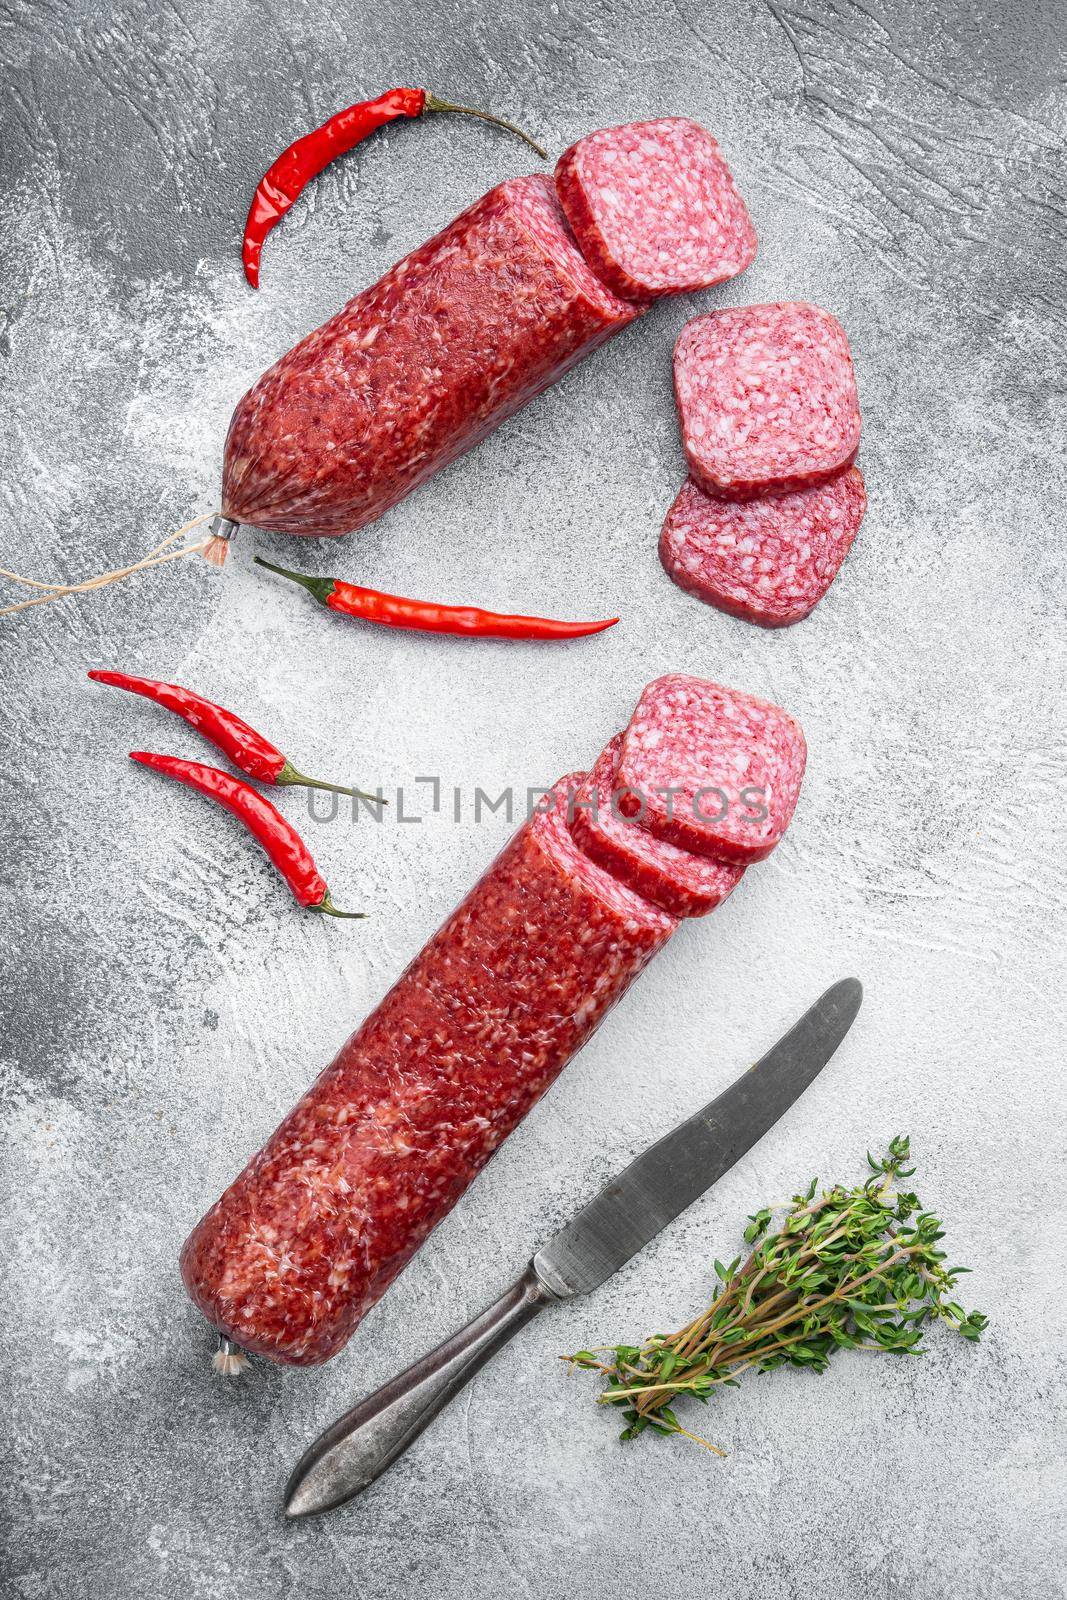 Sausage fresh rosemary and spices, on gray stone table background, top view flat lay by Ilianesolenyi